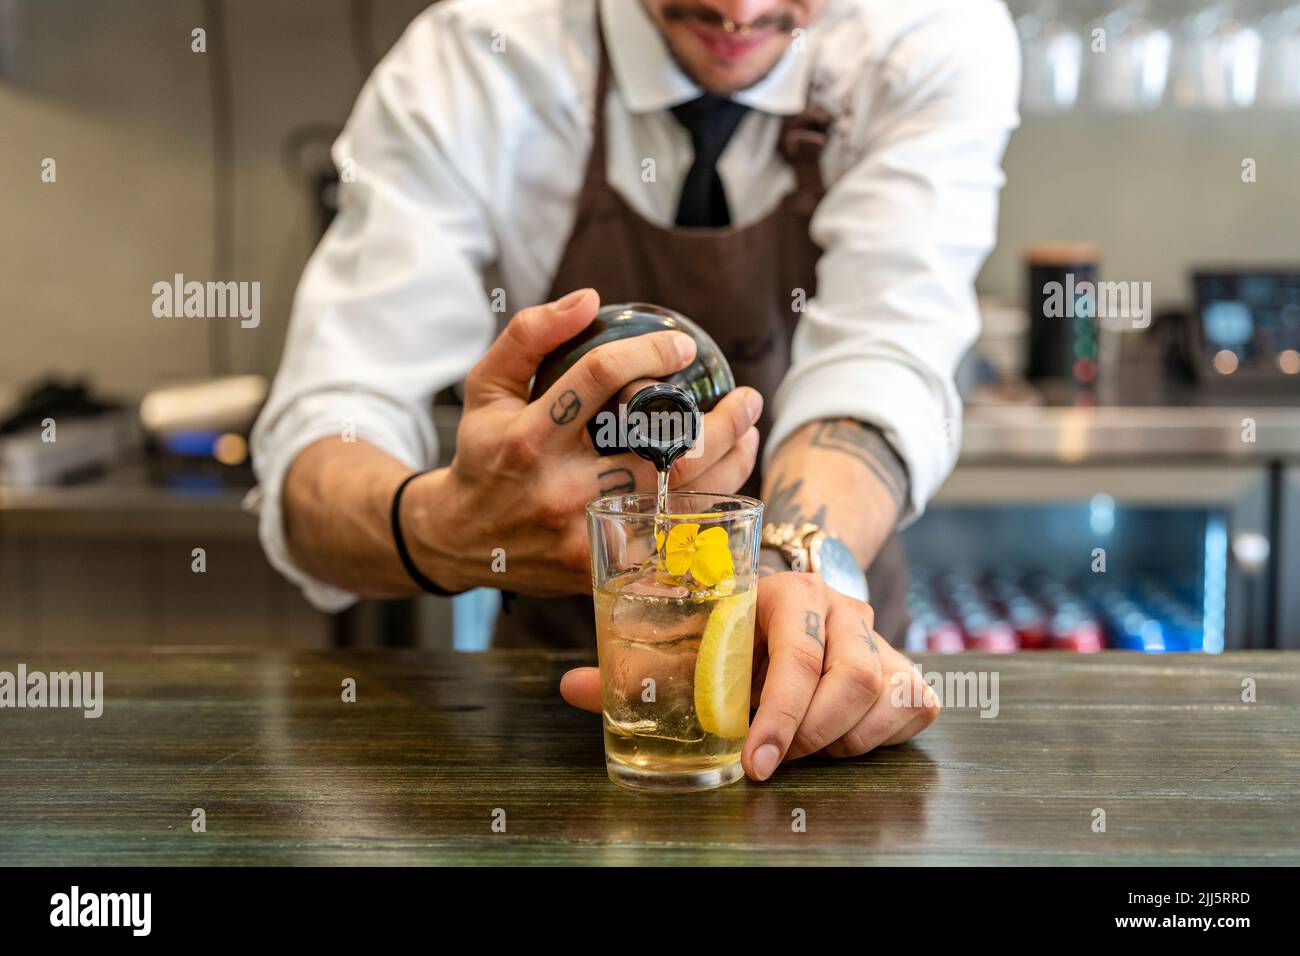 Bartender pouring drink in glass at bar counter Stock Photo